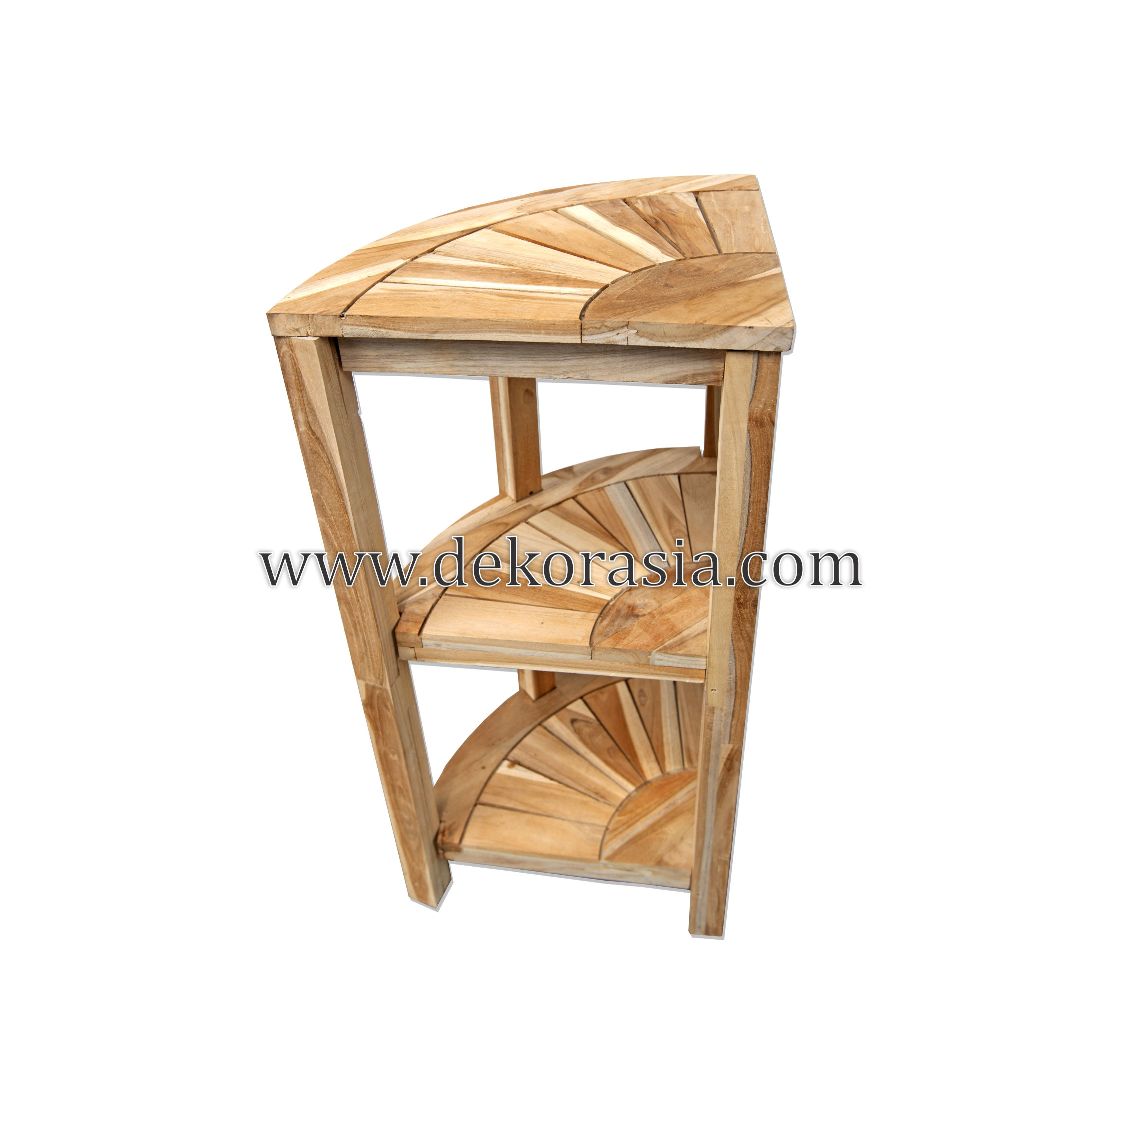 Teak Corner Bench 3 Layer Bathroom Triangle Shaped with Shelf and Basket, Waterproof Shower Stool - Fully Assembled